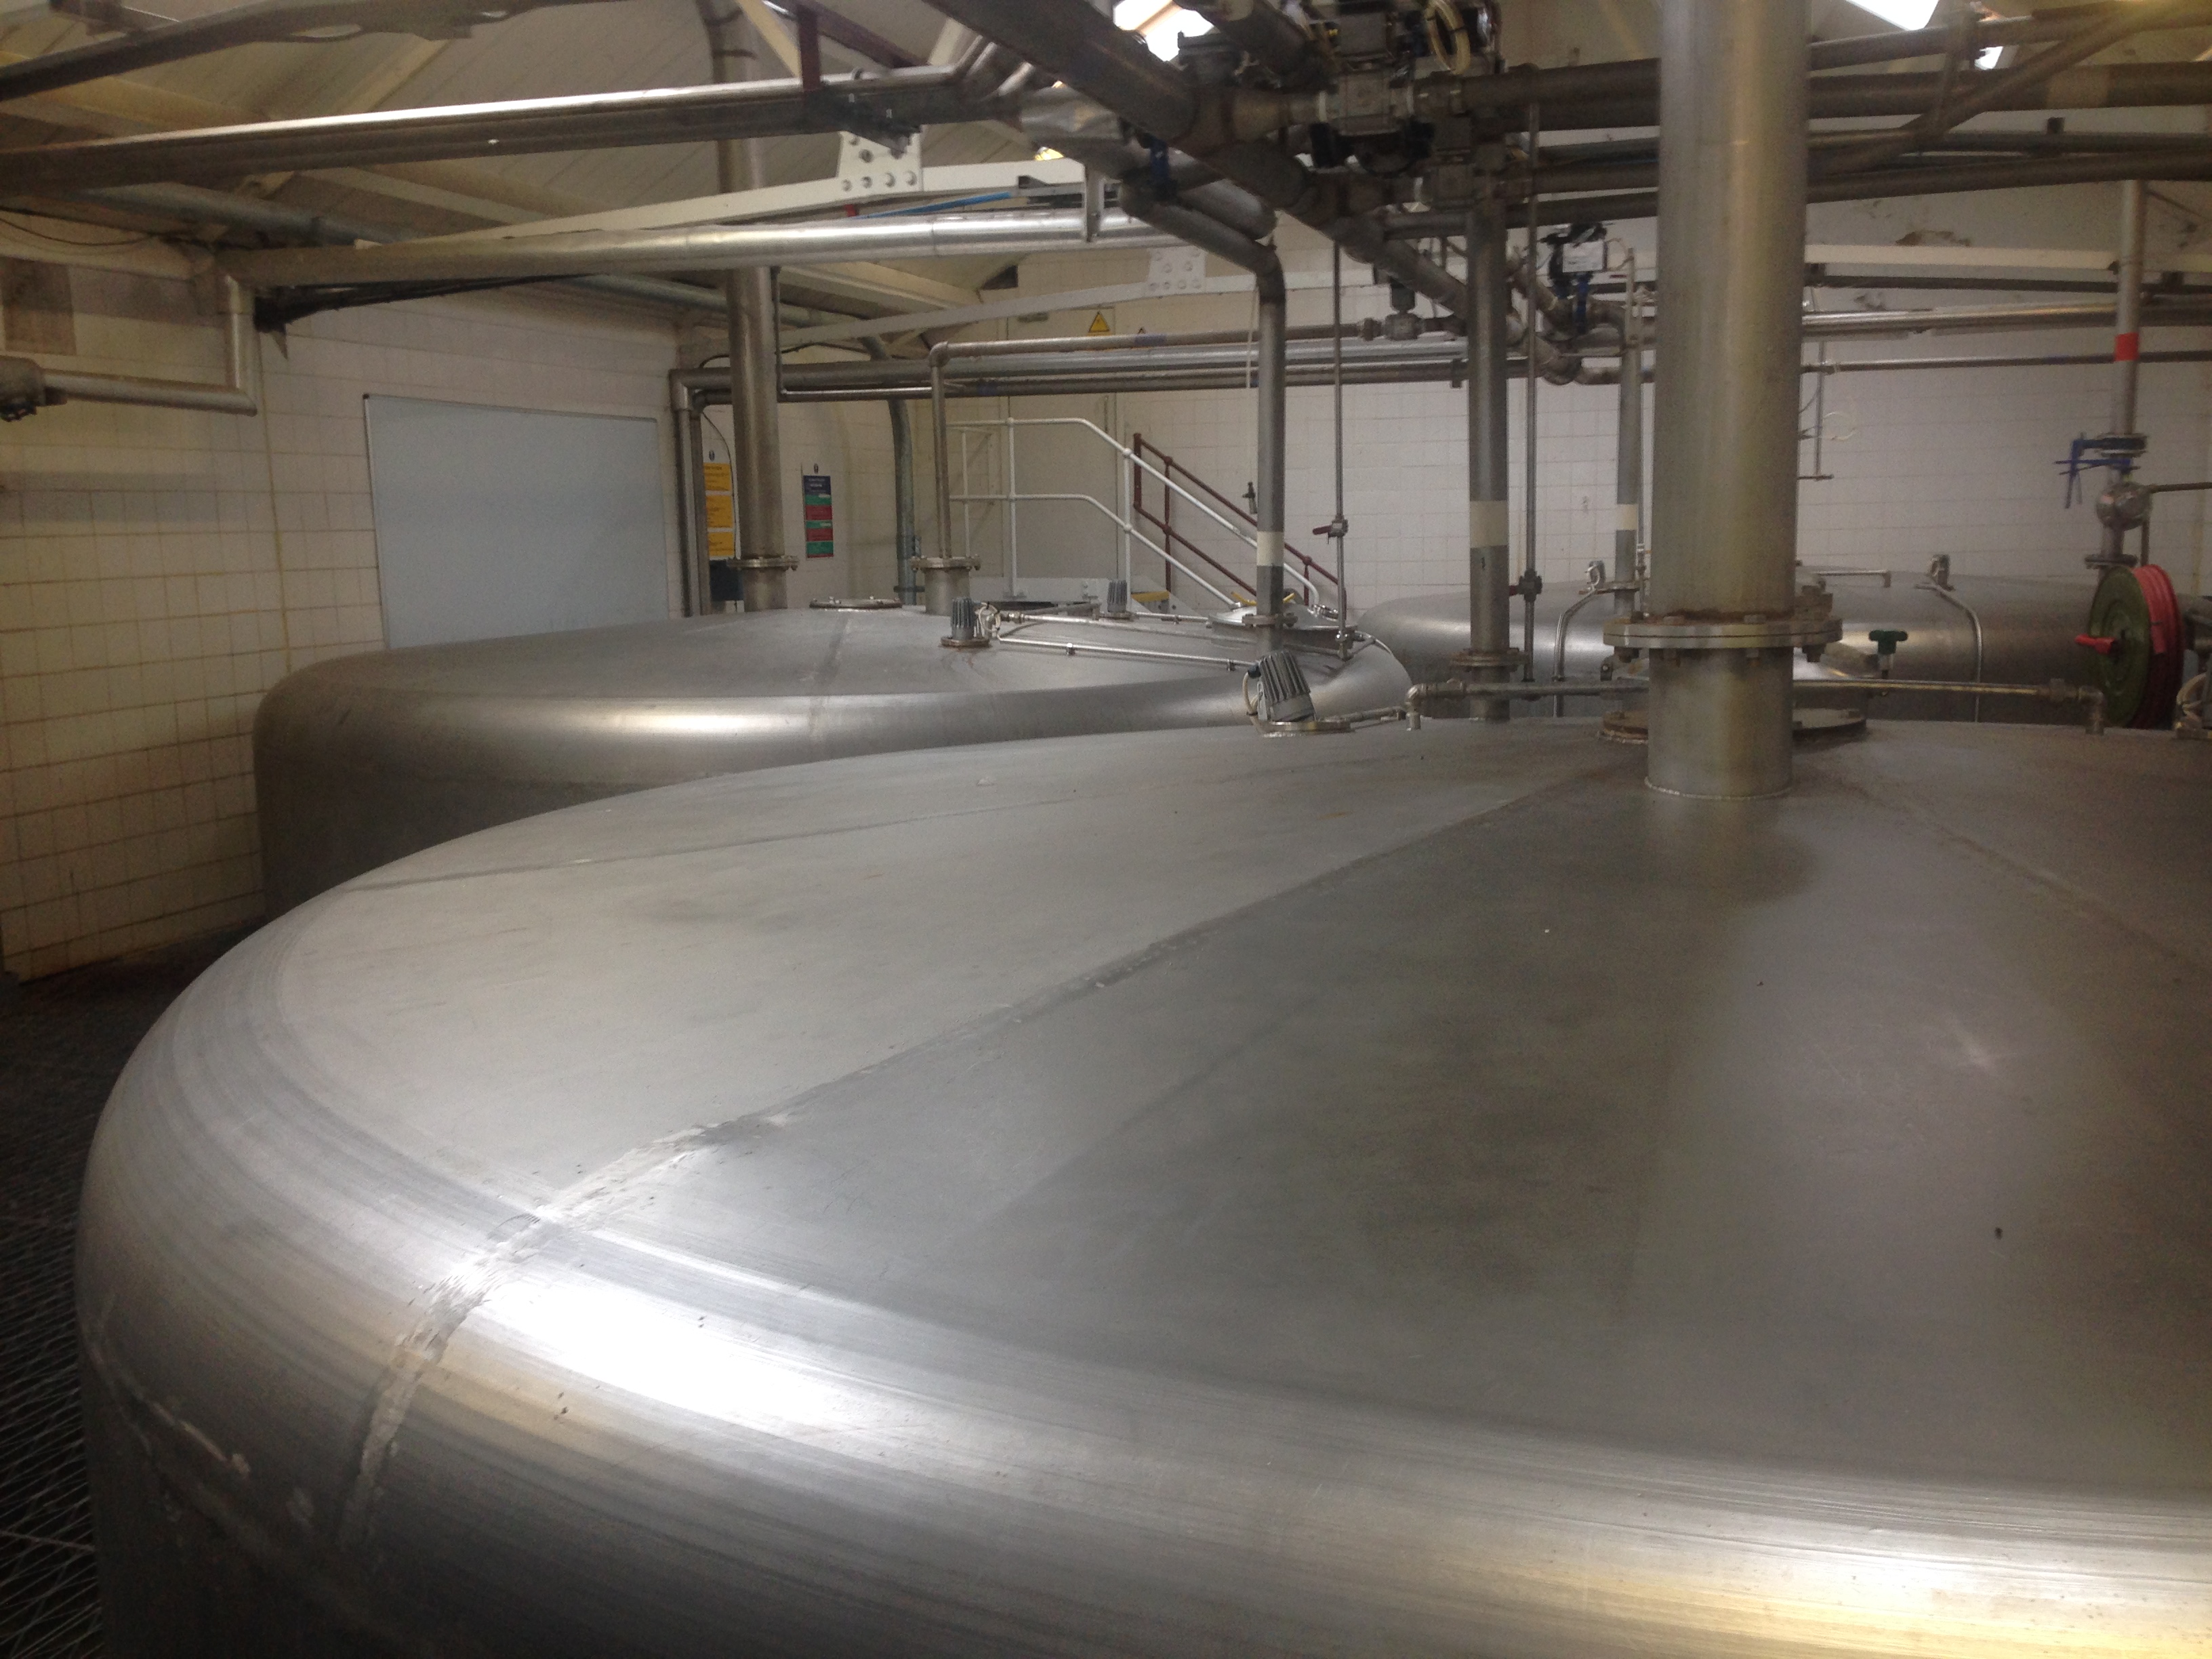 The milled barley is fermented to wort (essentially beer) in aluminium washbacks